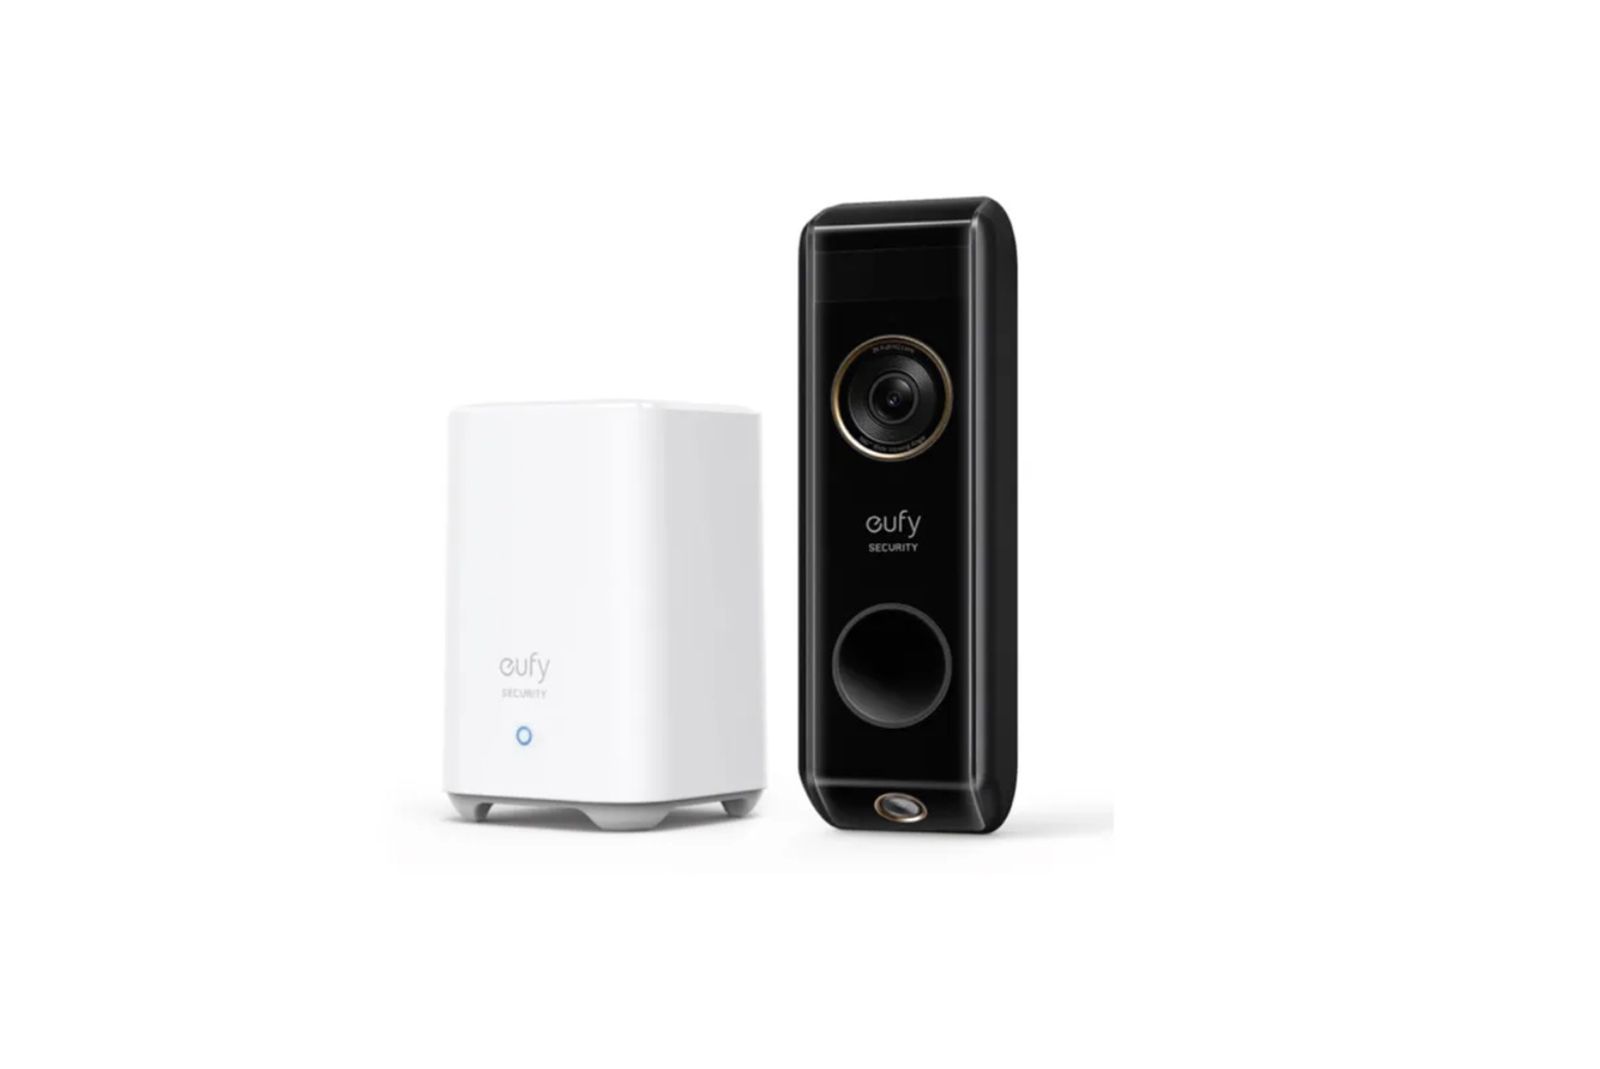 Eufy's new video doorbell has two cameras for person and package detection photo 2